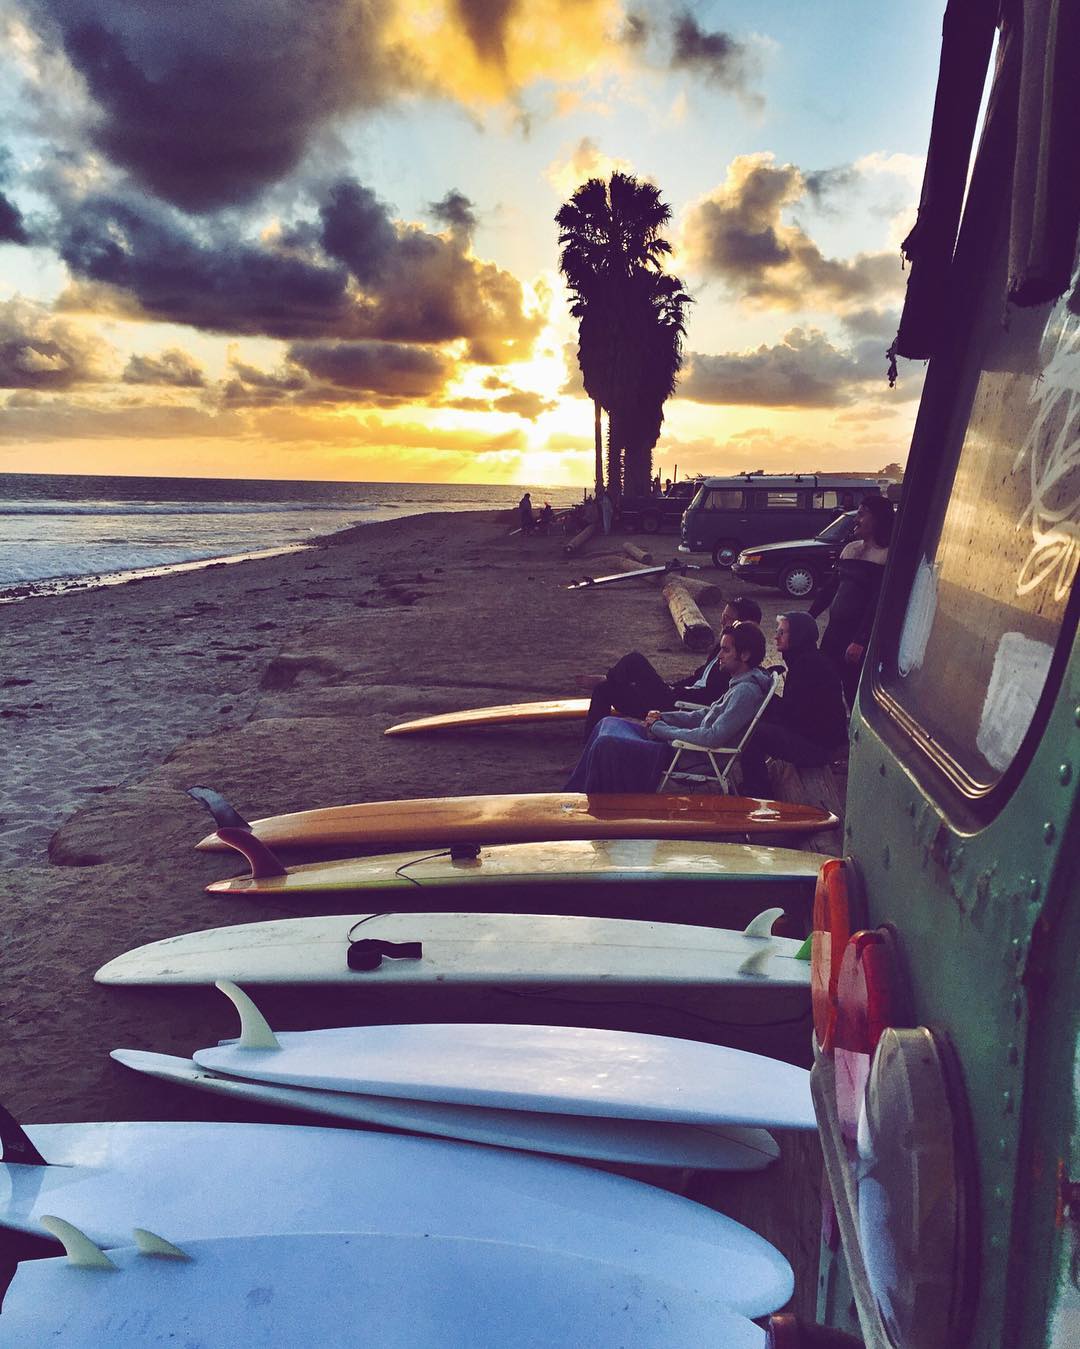 I_m_listening_to_a_guy_singing_Don_t_touch_my_bikini..._____beach__sunset__surfing__sanonofre__onthebus__offthebus_by_jxxsy.jpg